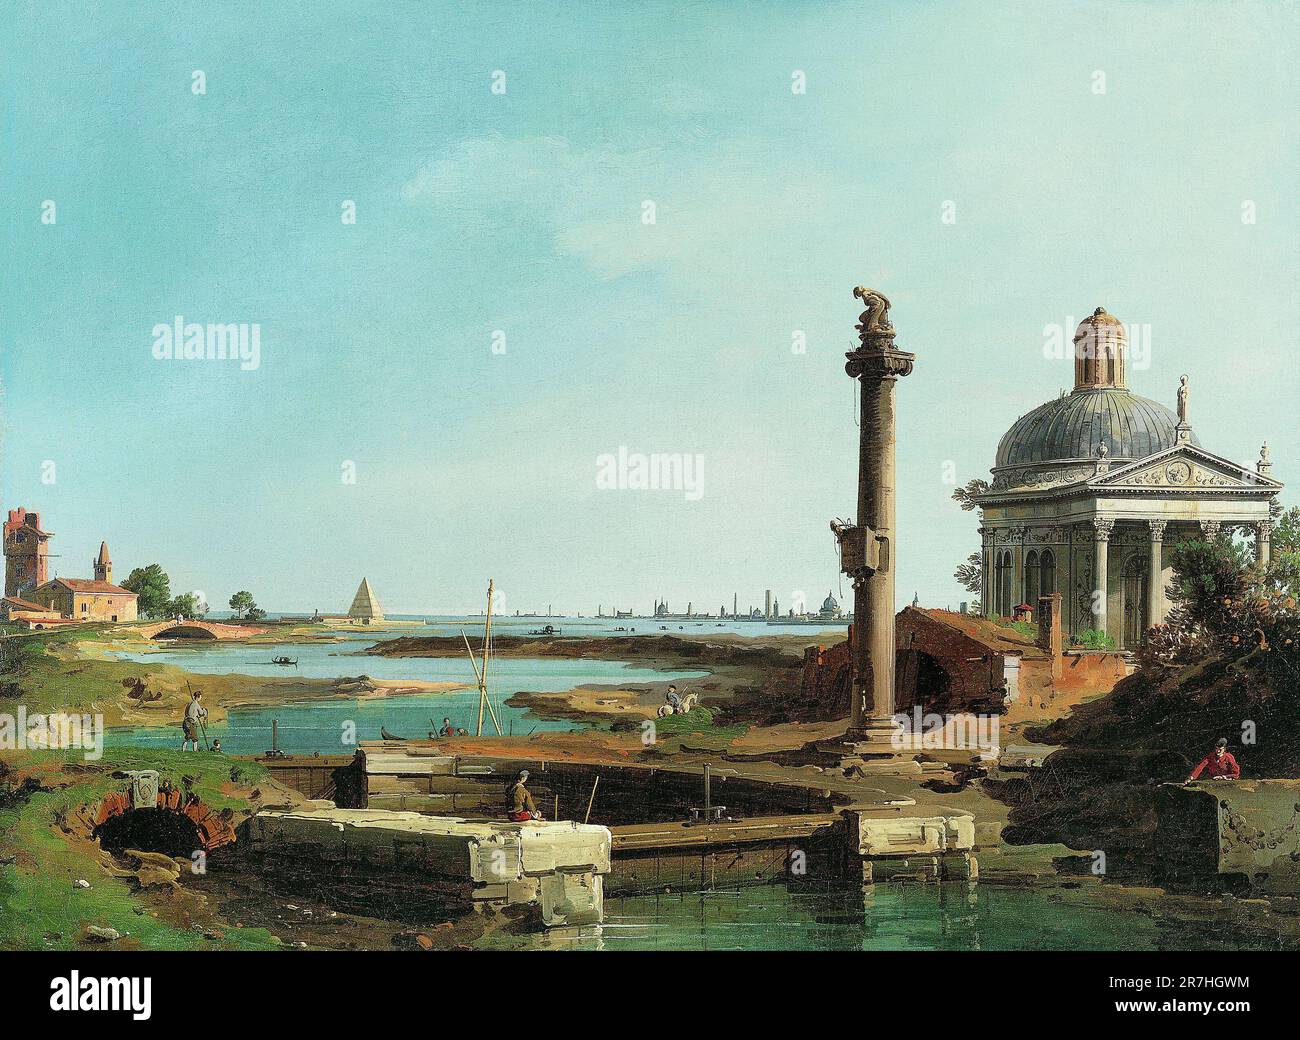 A Lock, a Column, and a Church beside a Lagoon. This is an invented scene (a Capriccio)  painted by the Venetian painter Giovanni Antonio Canal, commonly known as Canaletto.  Canaletto specialised in realsitic city scenes (called Verduti) but occasionally he painted from his imagination, which he called Capriccio. Stock Photo